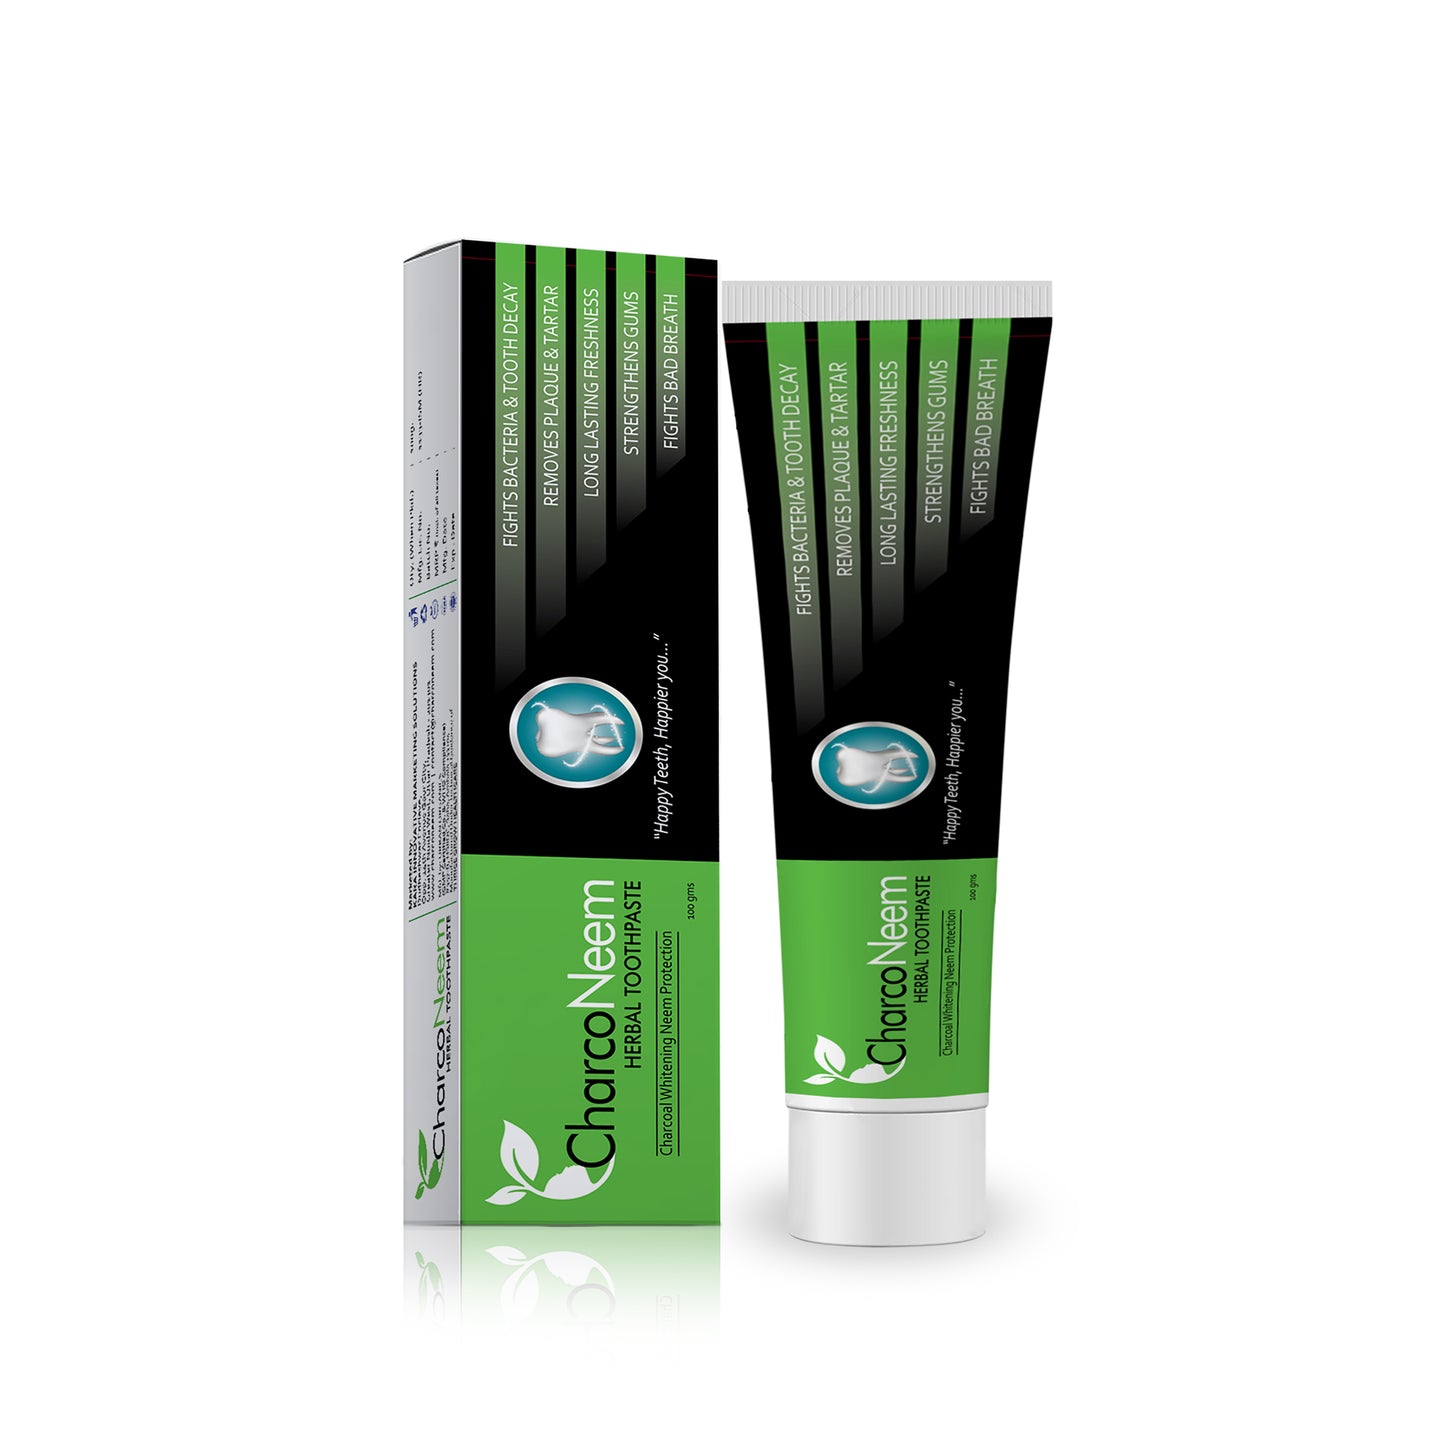 CharcoNeem Charcoal & Neem Toothpaste With Coconut oil Extract - (100GM)